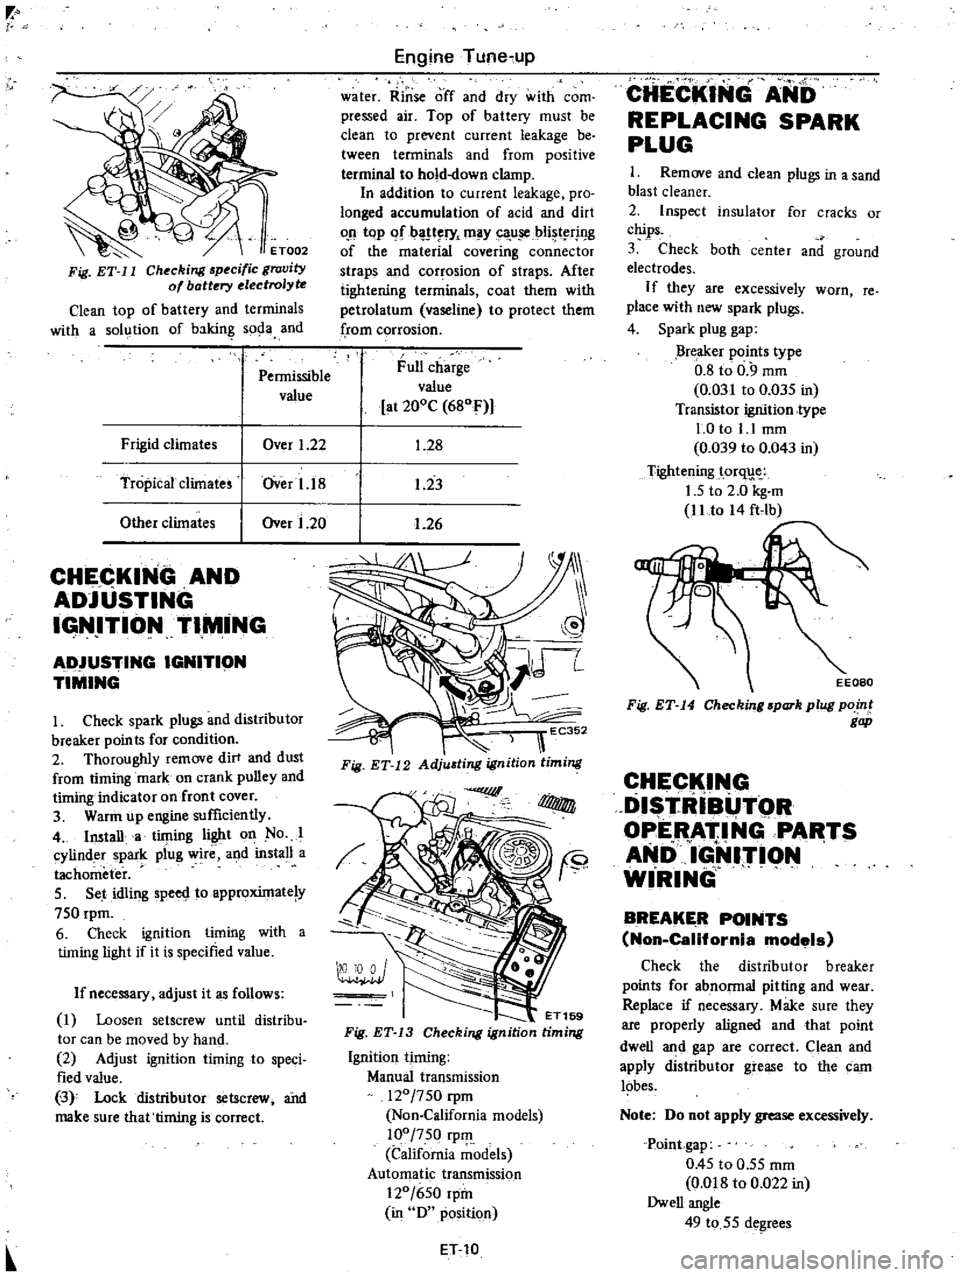 DATSUN PICK-UP 1977  Service Manual 
p

r

ET002

Fig 
E1 
11

Checking 
specific 
gravity

of 
bottery 
electrolyre

Clean

top 
of

battery 
and 
terminals

with 
a 
solution 
of 
bakin

soda 
and

Pennissible

value

Frigid 
climates